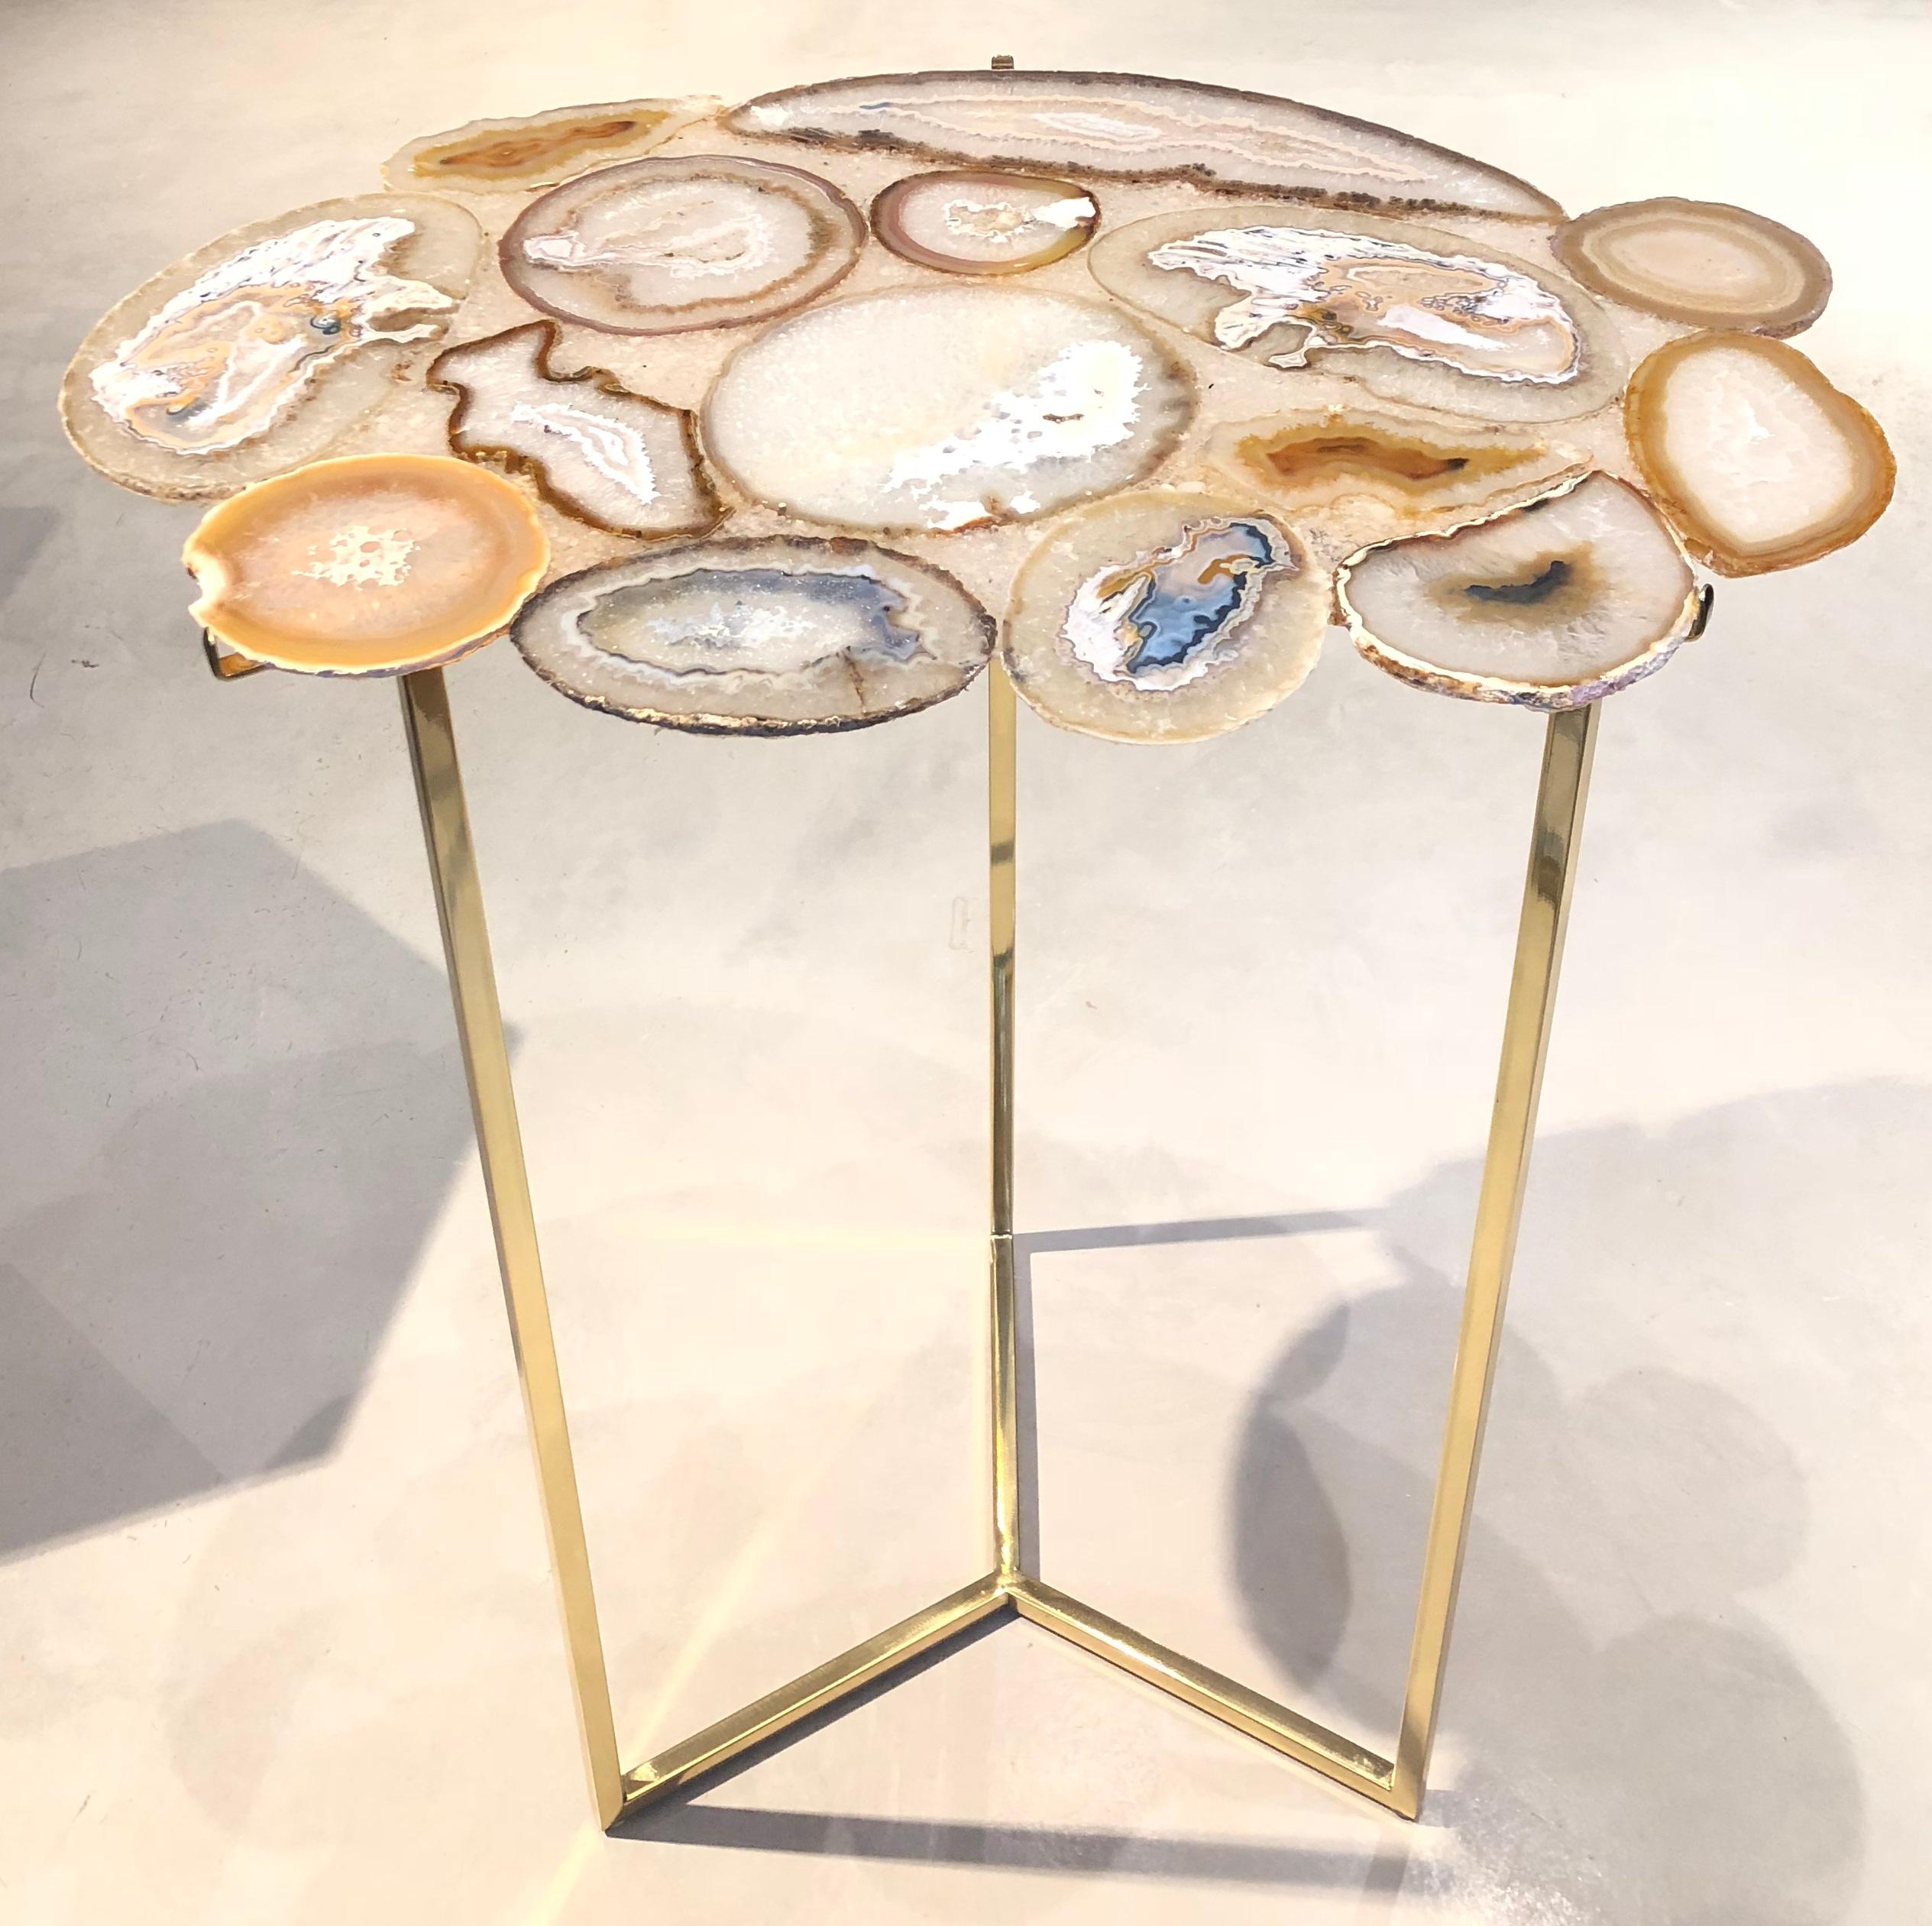 Other Unique Agate Stones Mosaic Coffee Table